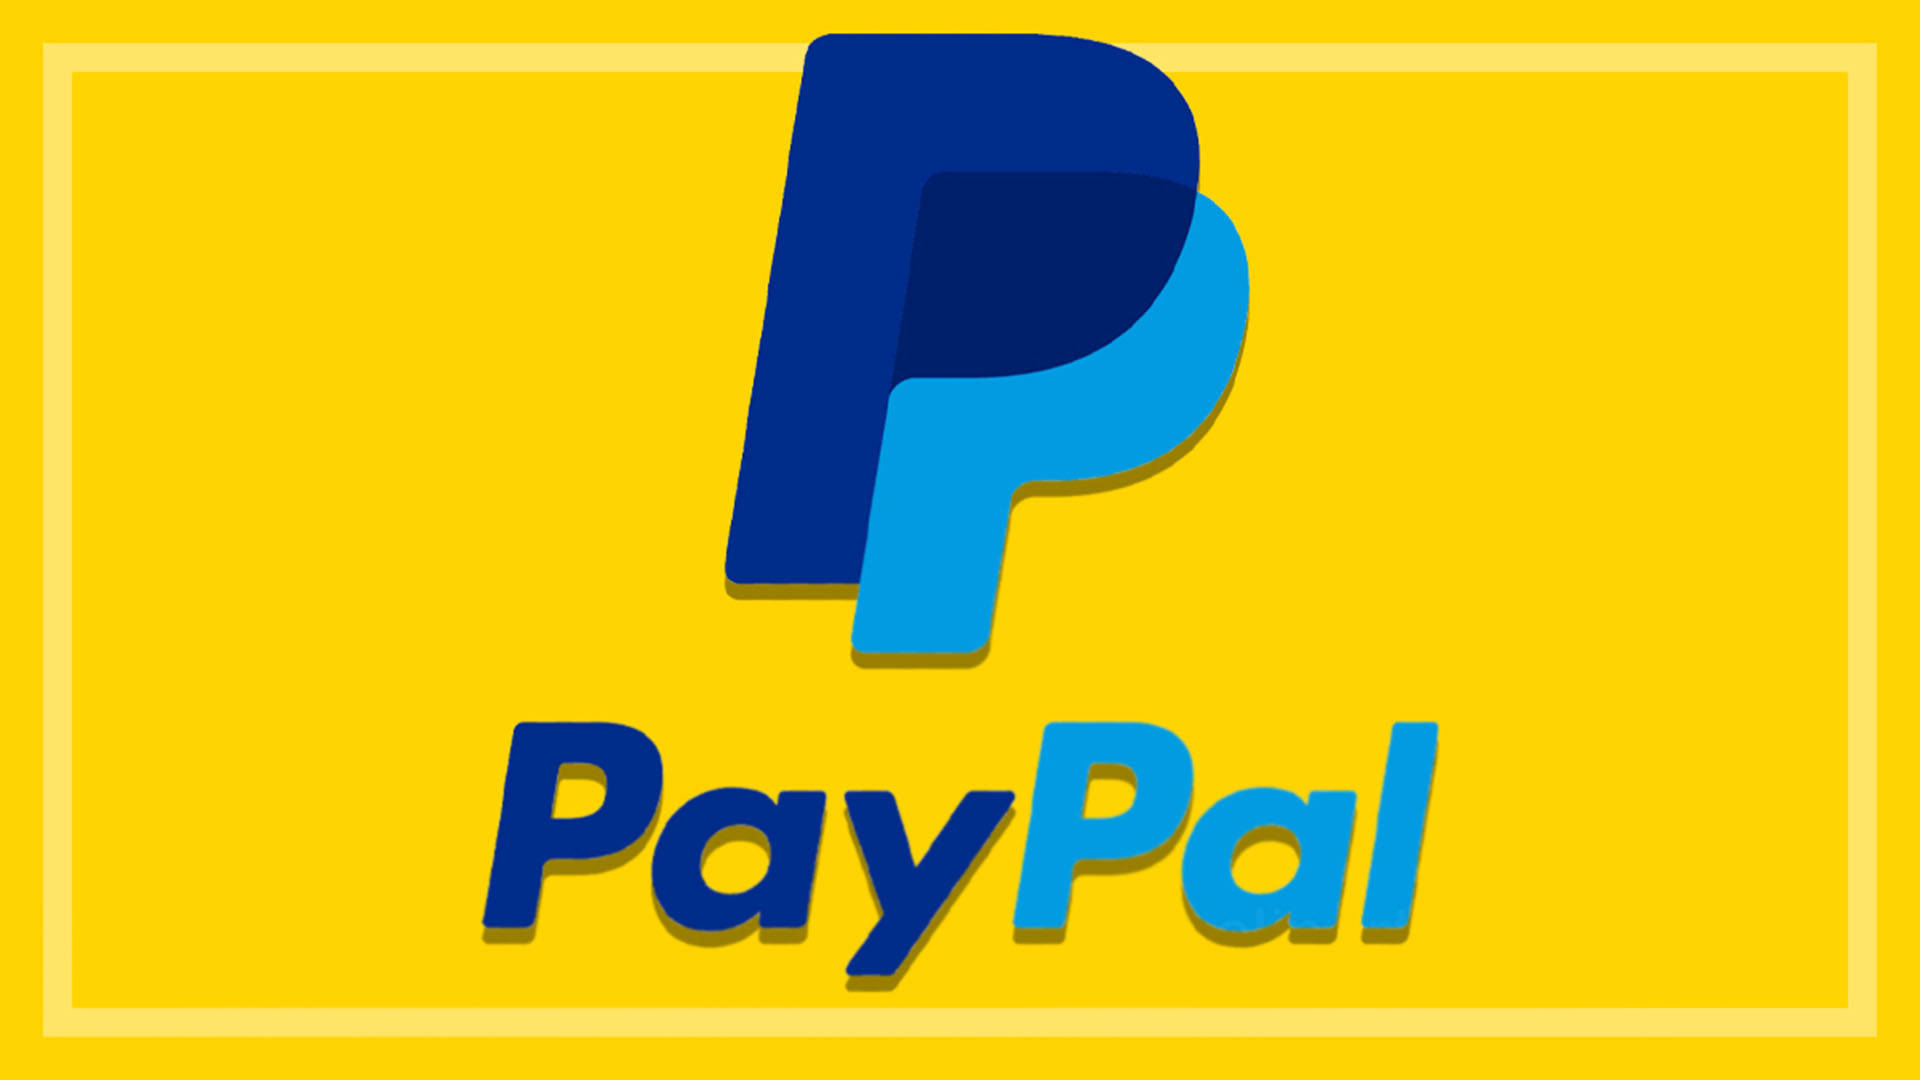 Paypal In Yellow Background Background